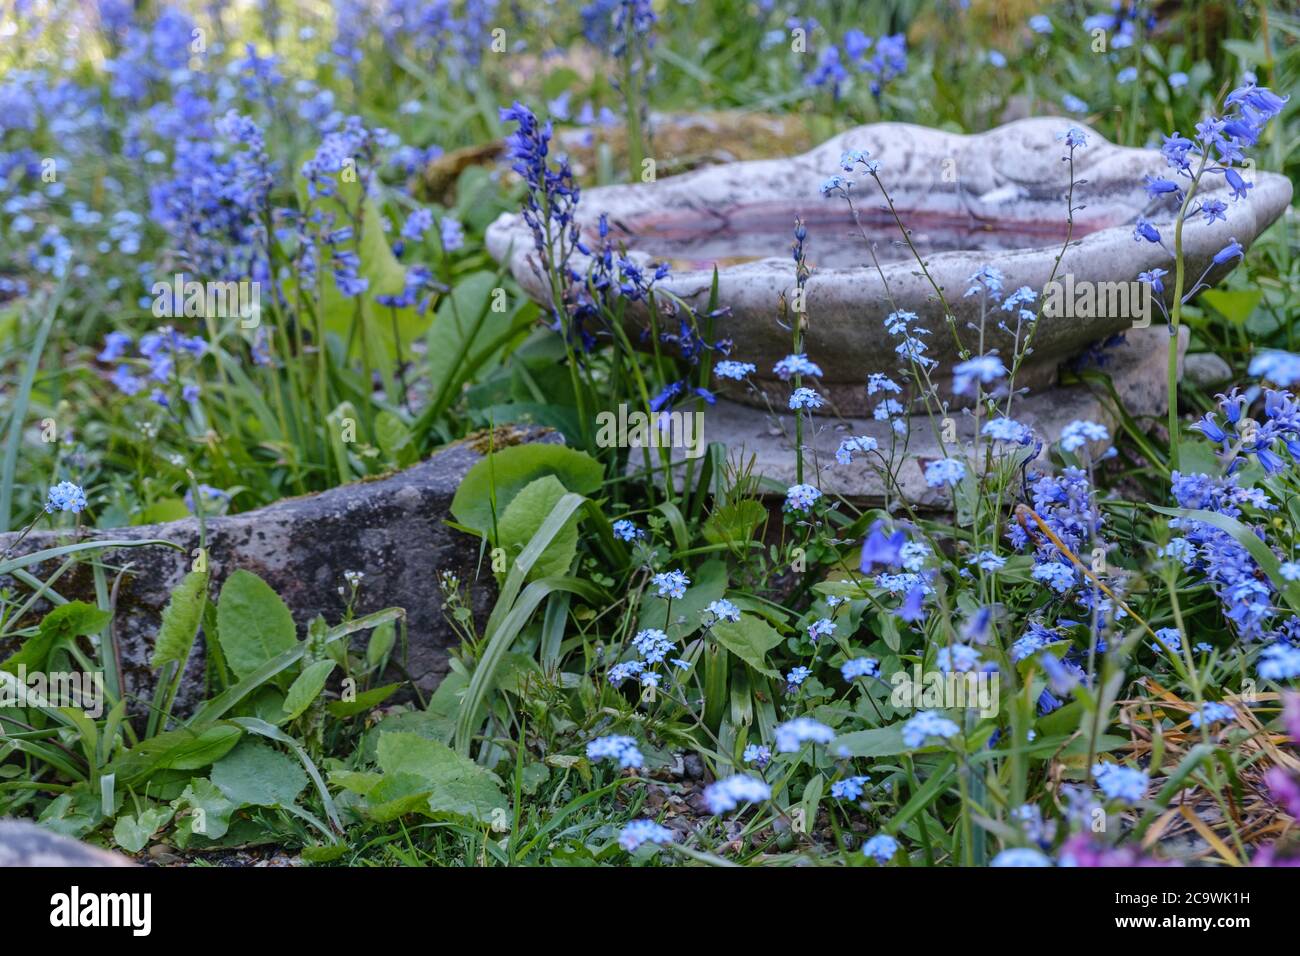 Close-up of Old stone bird bath in rockery surrounded by flowers & foliage at Eastcote House Gardens, Eastcote Hillingdon, West London. Stock Photo